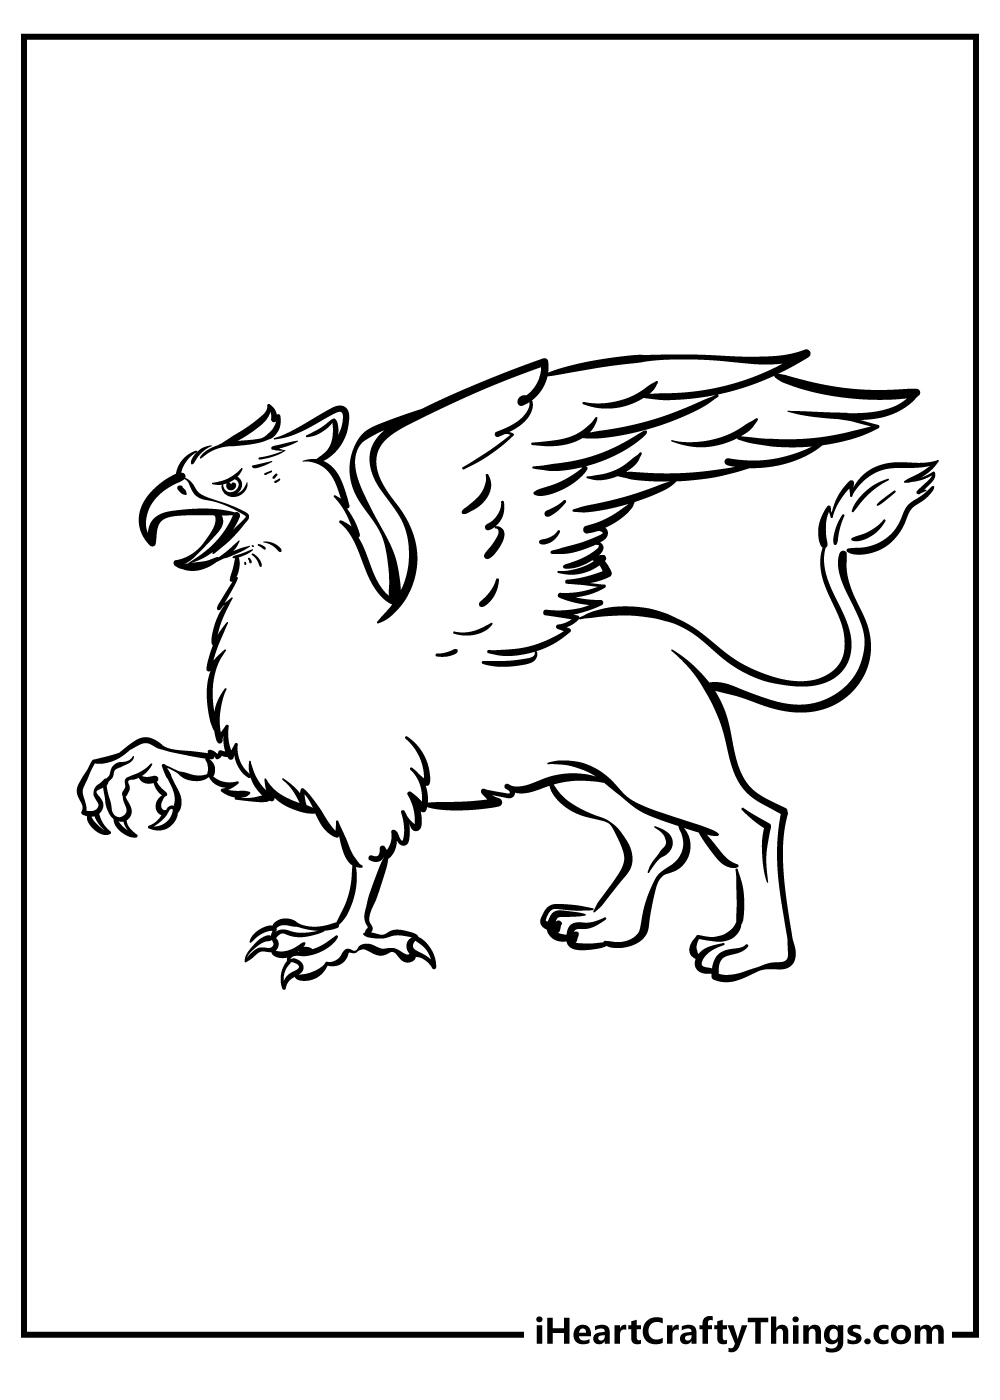 Griffin coloring pages free printables